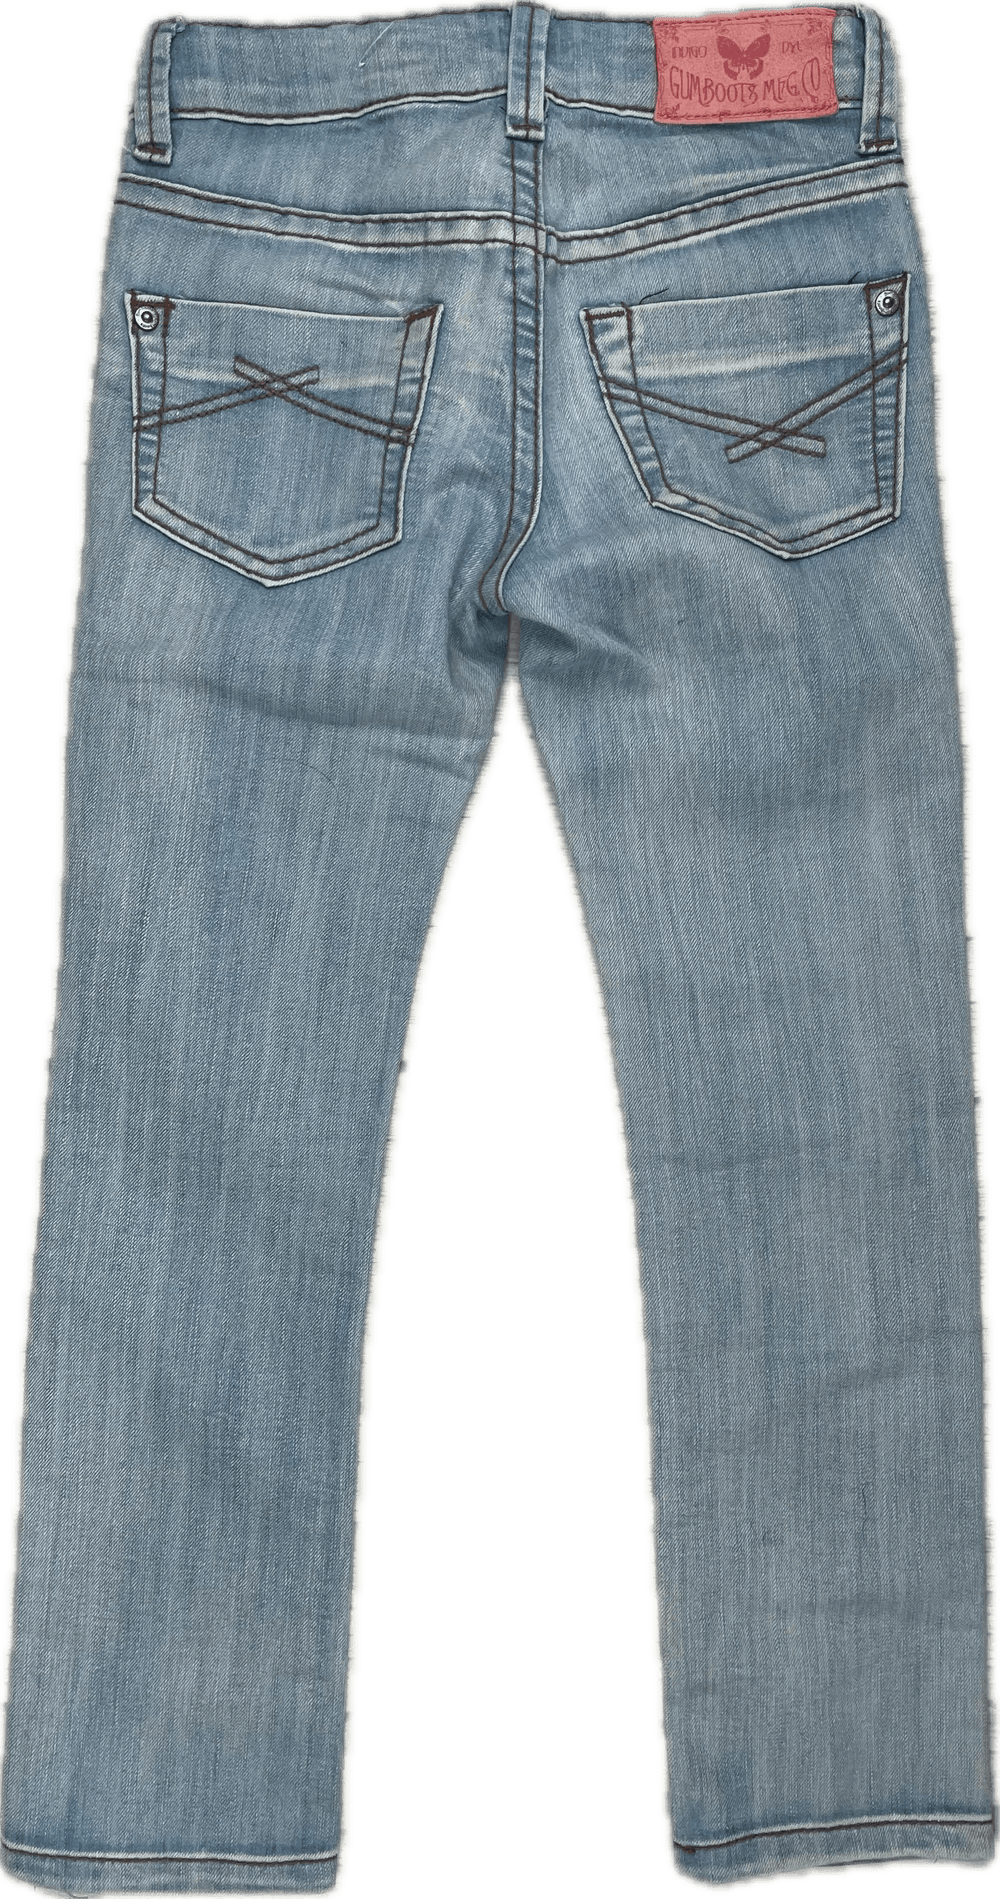 Gumboots Kids Light Wash Slim Straight Jeans - Size 6/7Y - Jean Pool